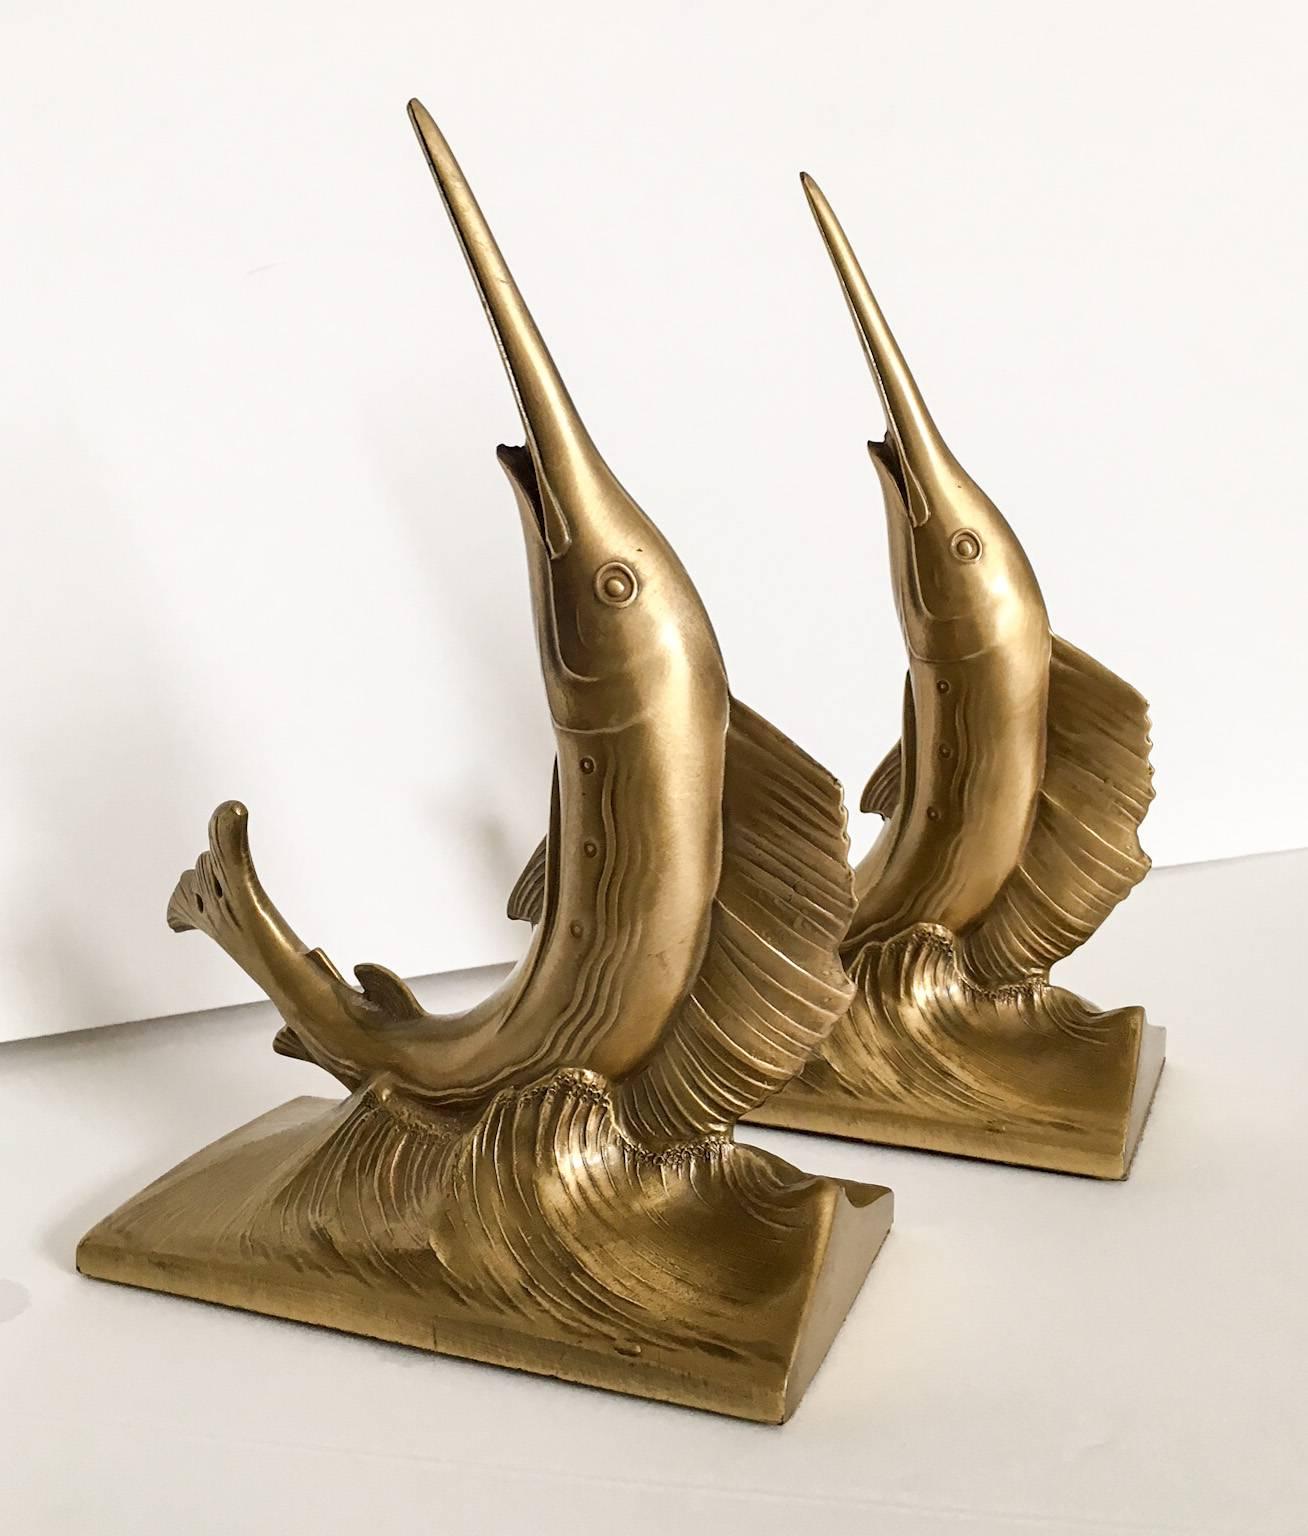 Heavy pair of gold-finish spelter bookends in the form of a dolphin on a wave. Beautifully detailed and can be used for bookends in position 1 or 2 as photographed. Unmarked.